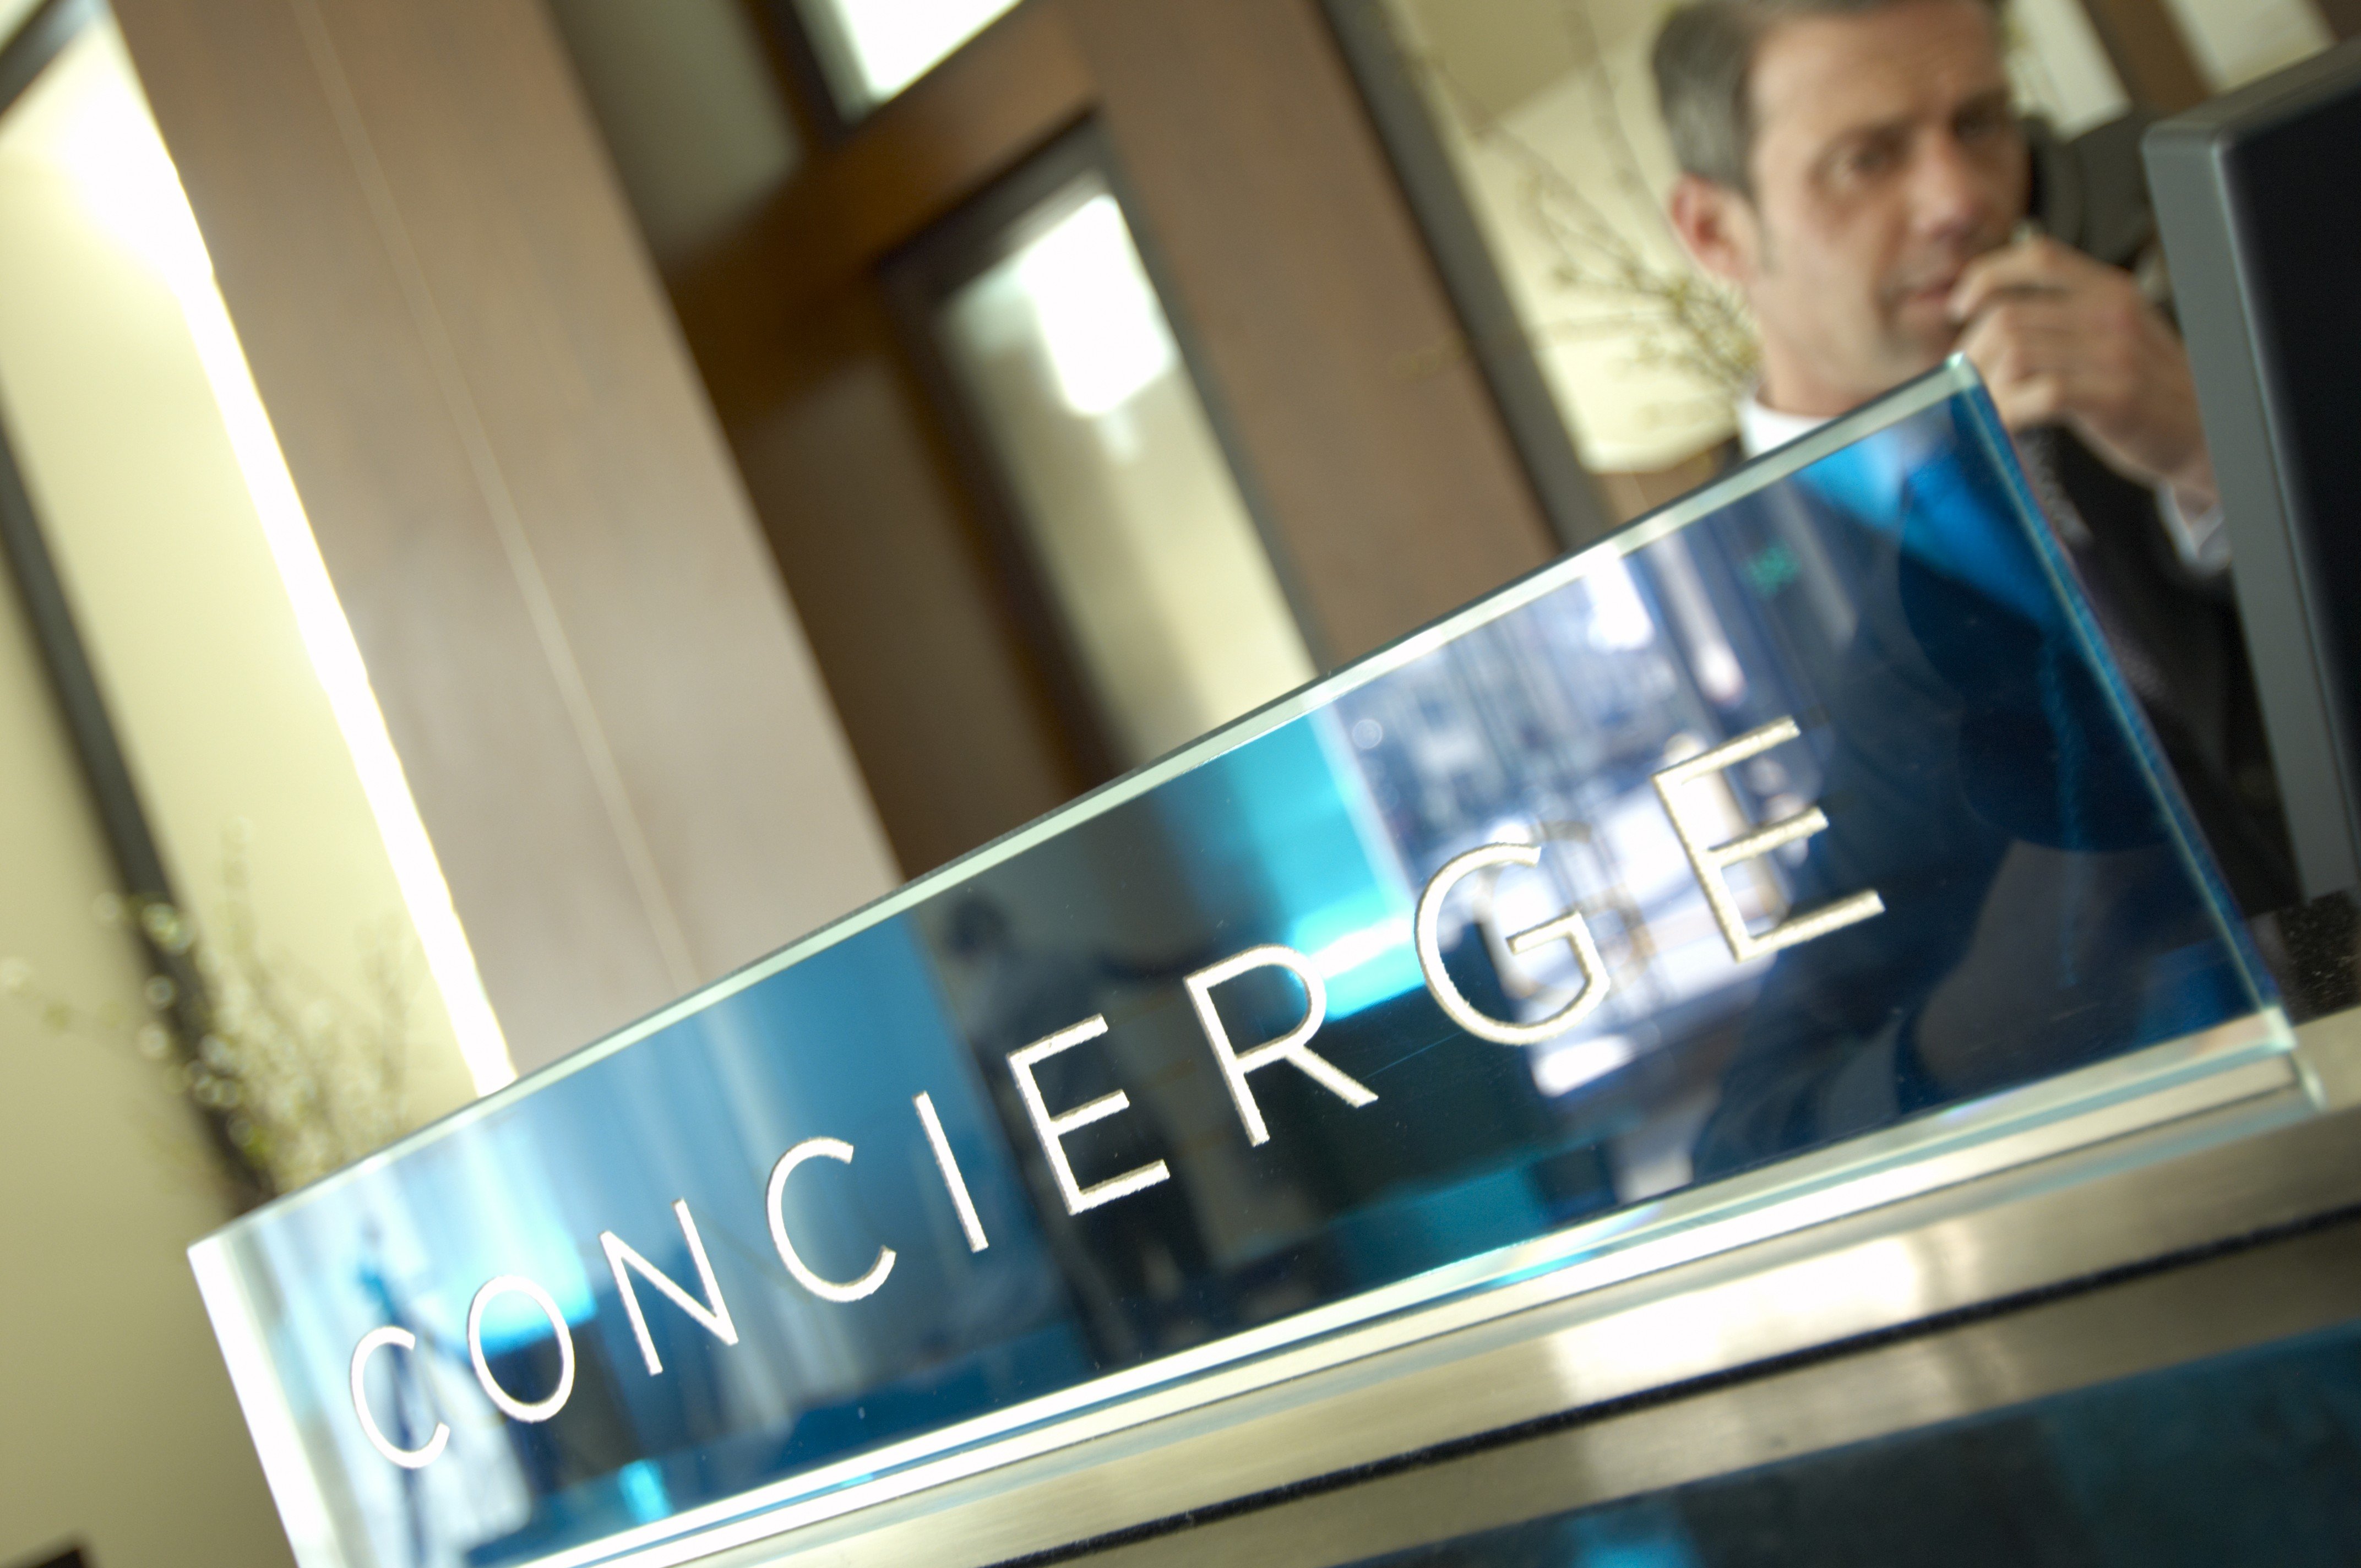 Concierge Staff on Duty in our Lobby